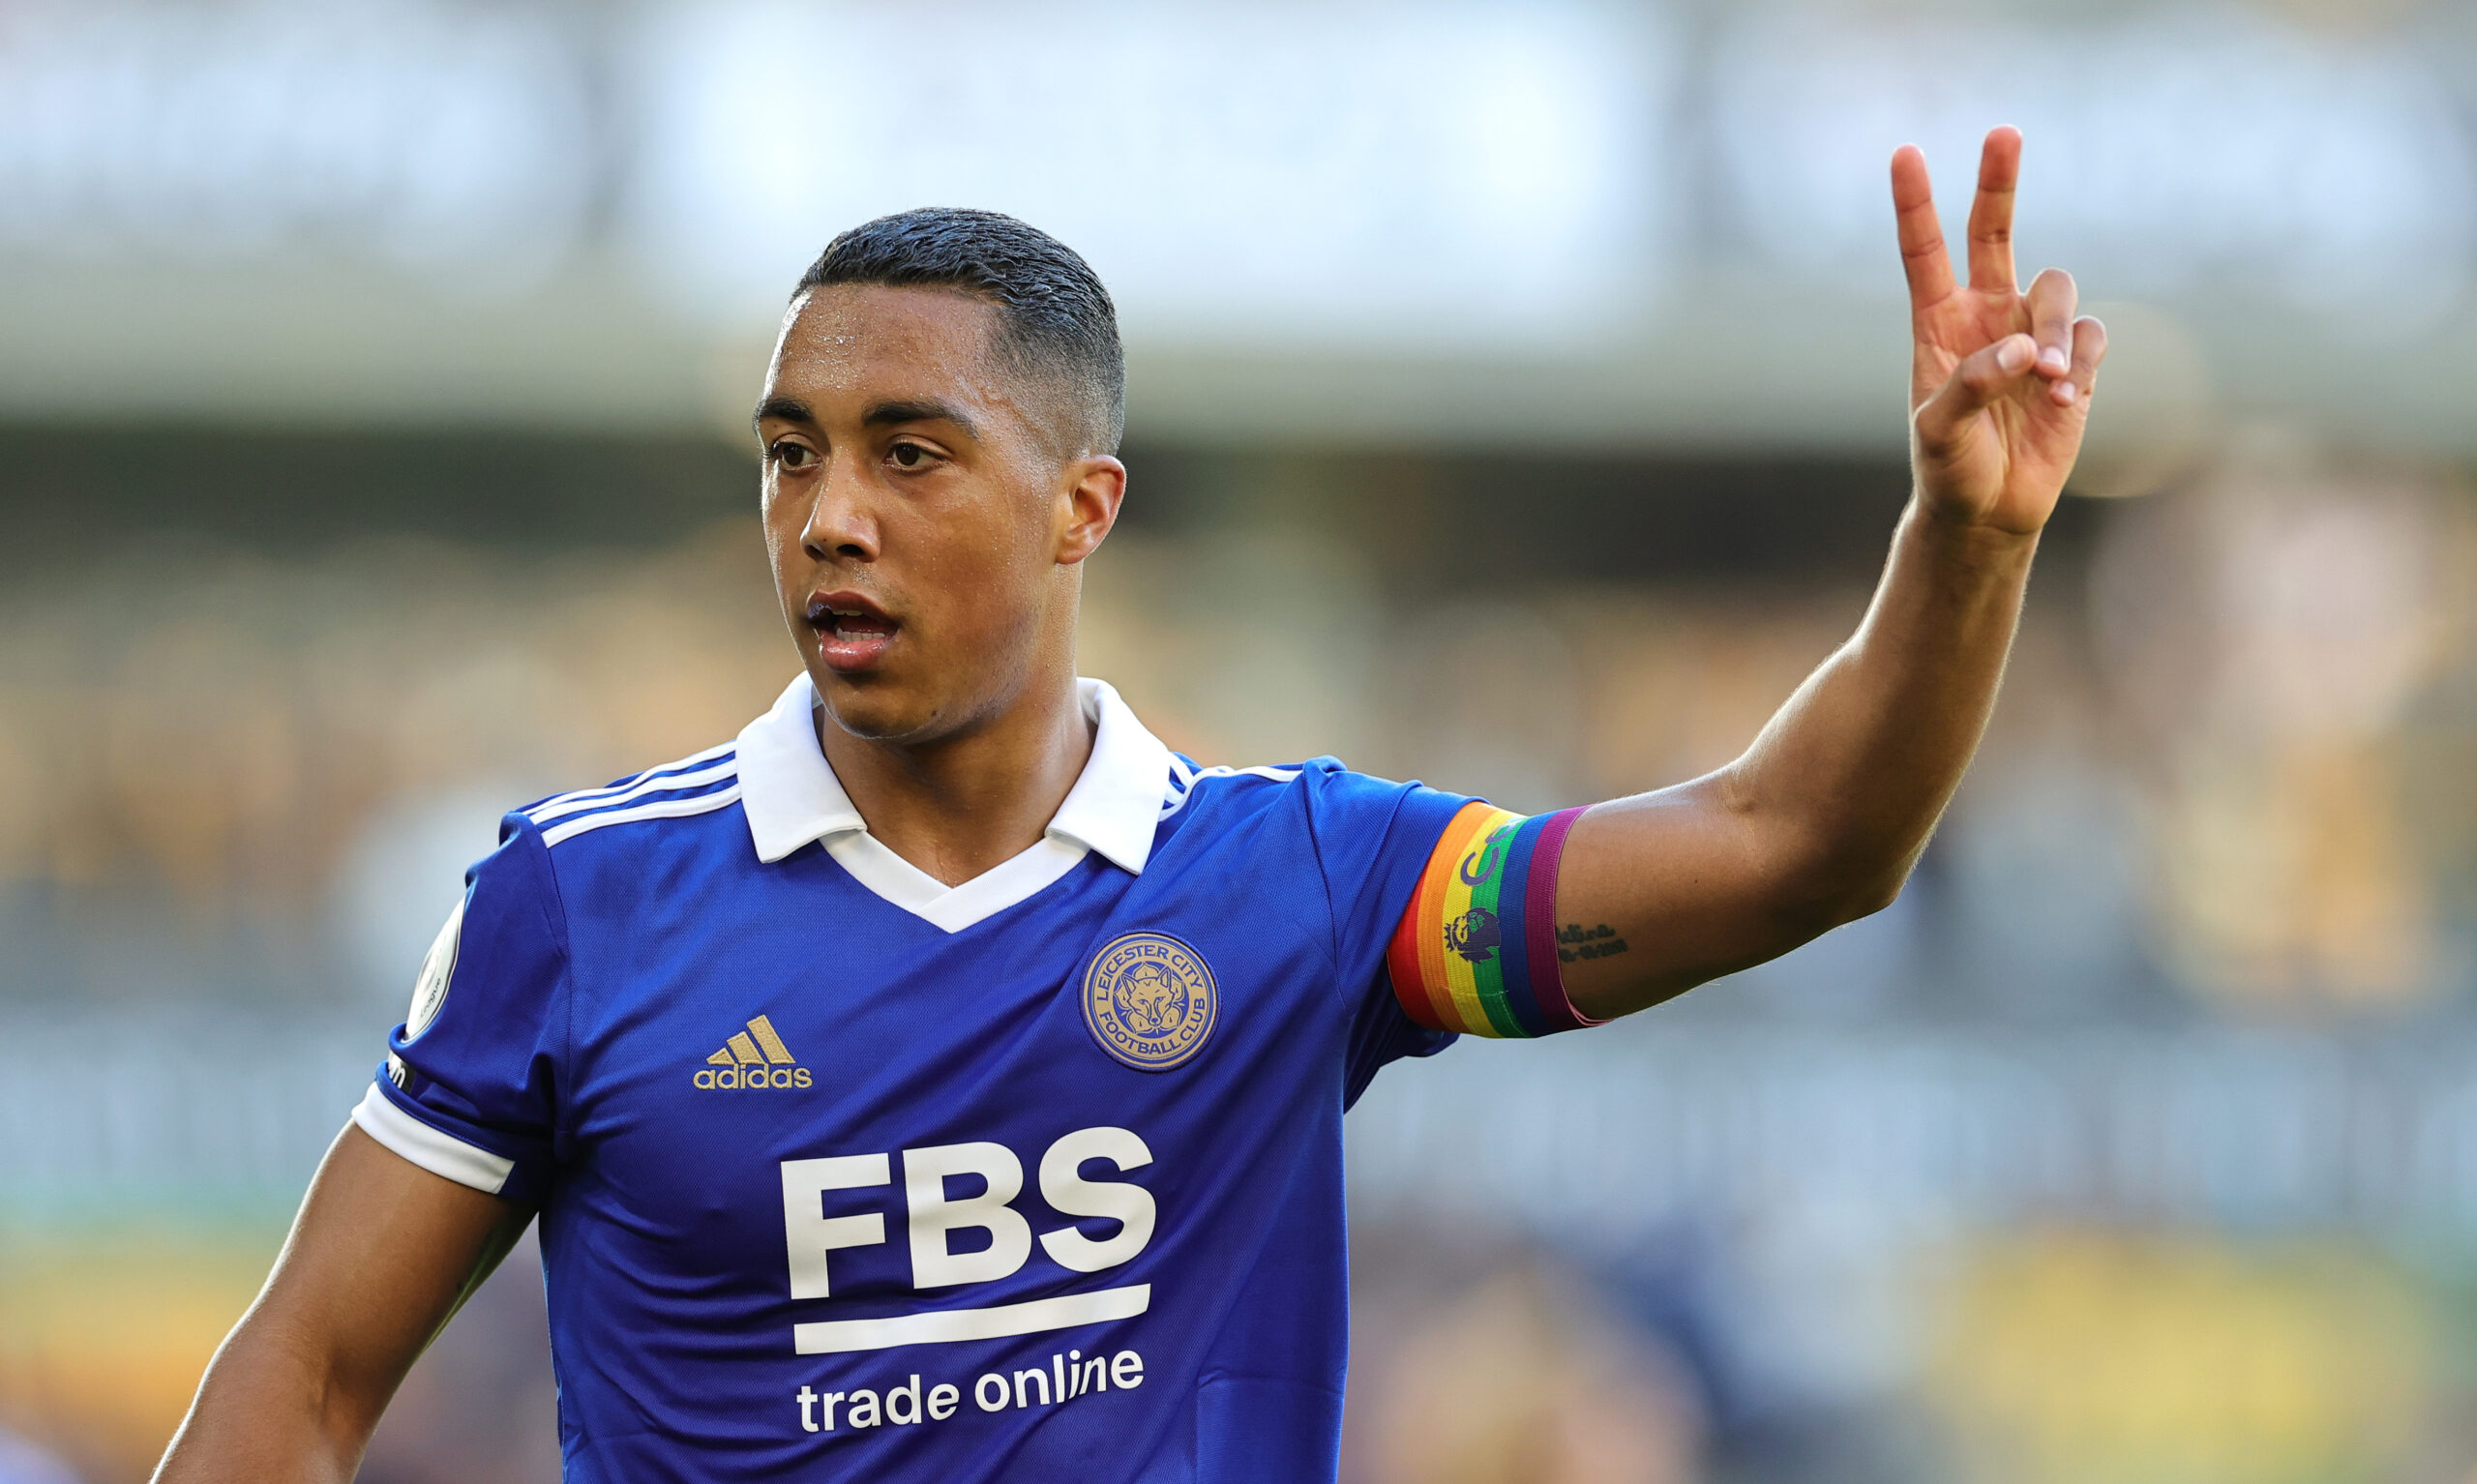 Youri Tielemans, Leicester midfielder coveted by Arsenal